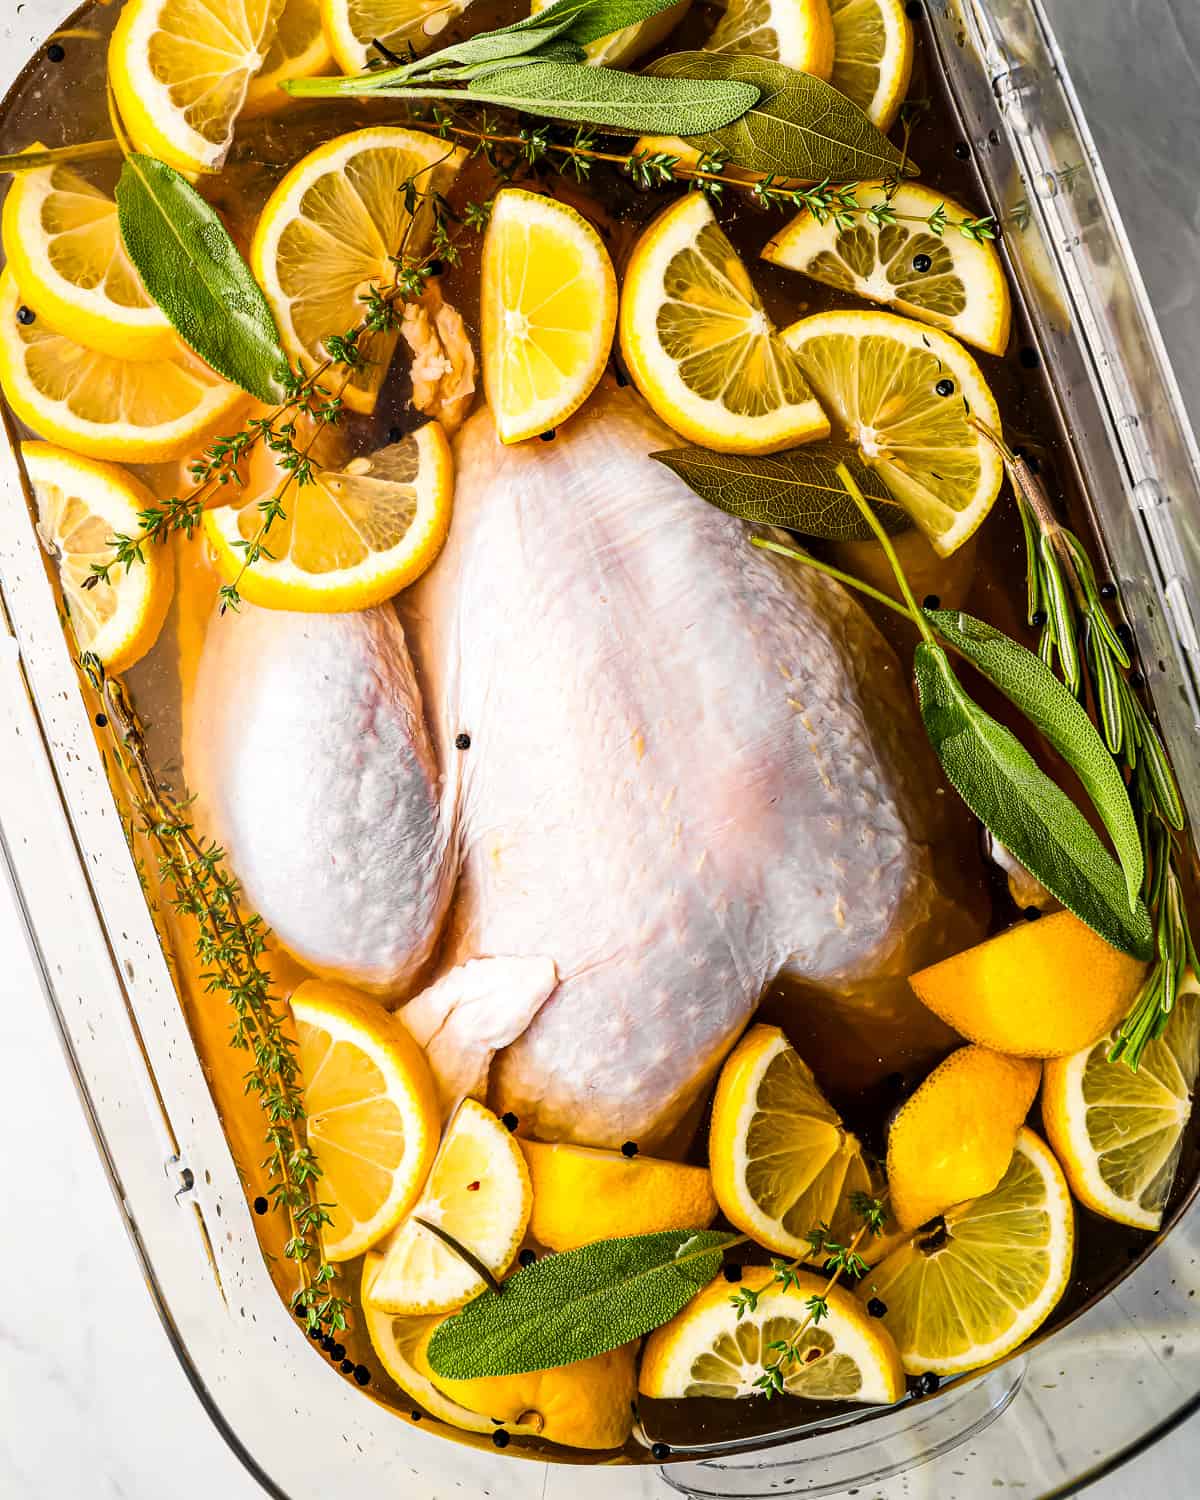 Turkey in a glass dish of brine with lemons and herbs.